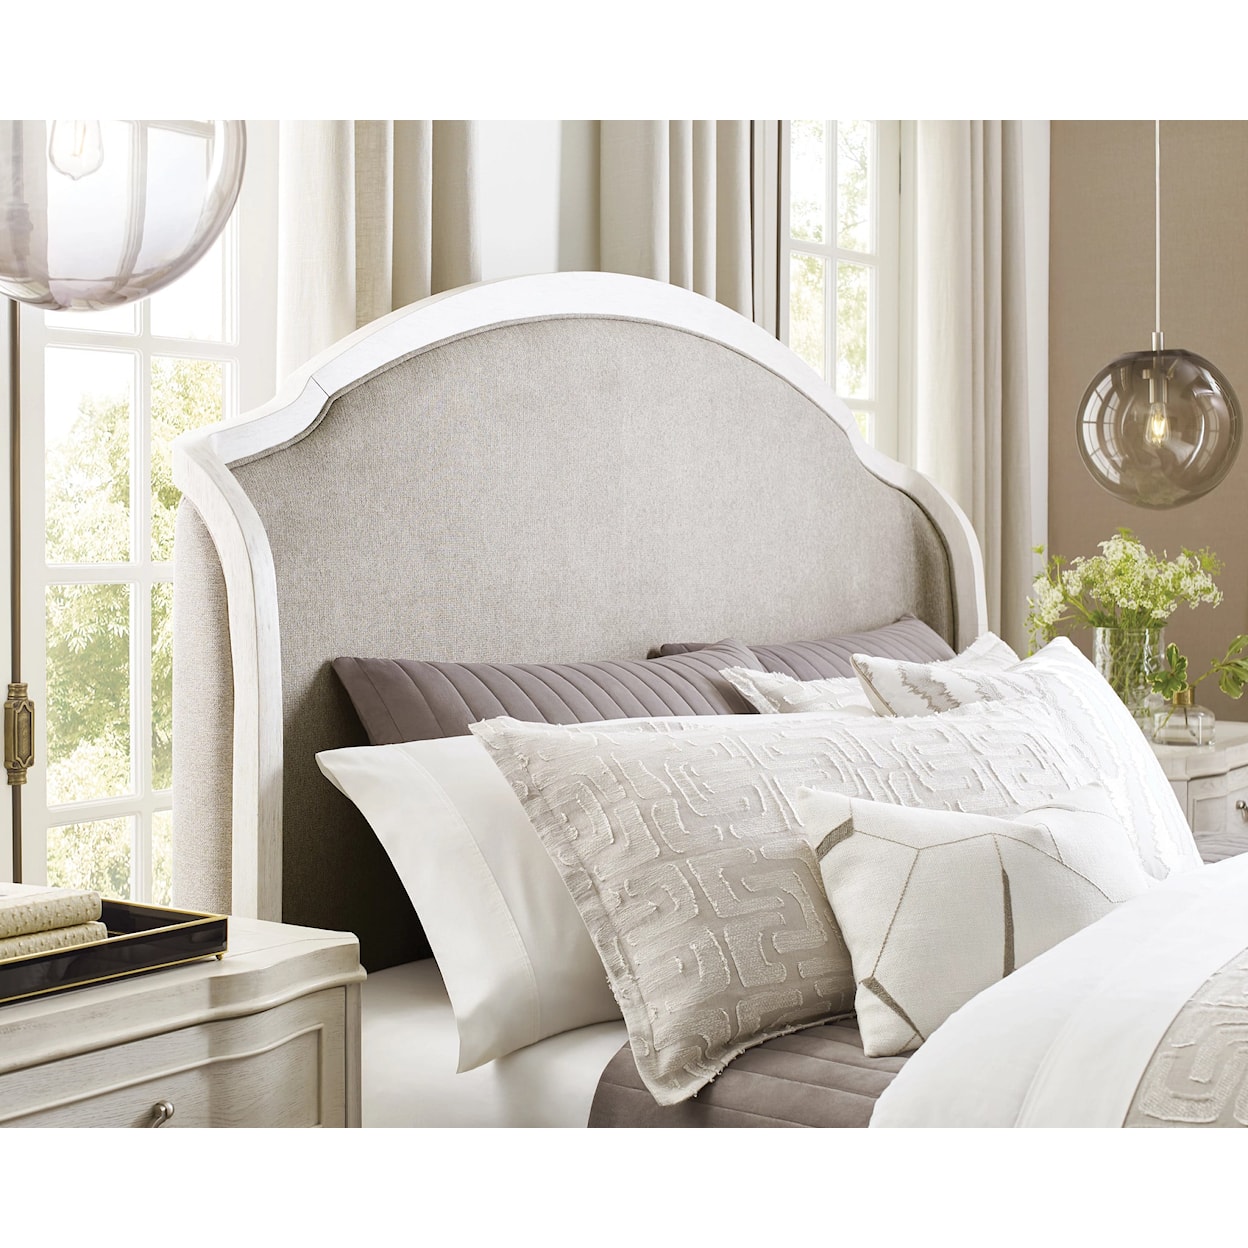 American Drew Harmony Carlyn Upholstered Bed